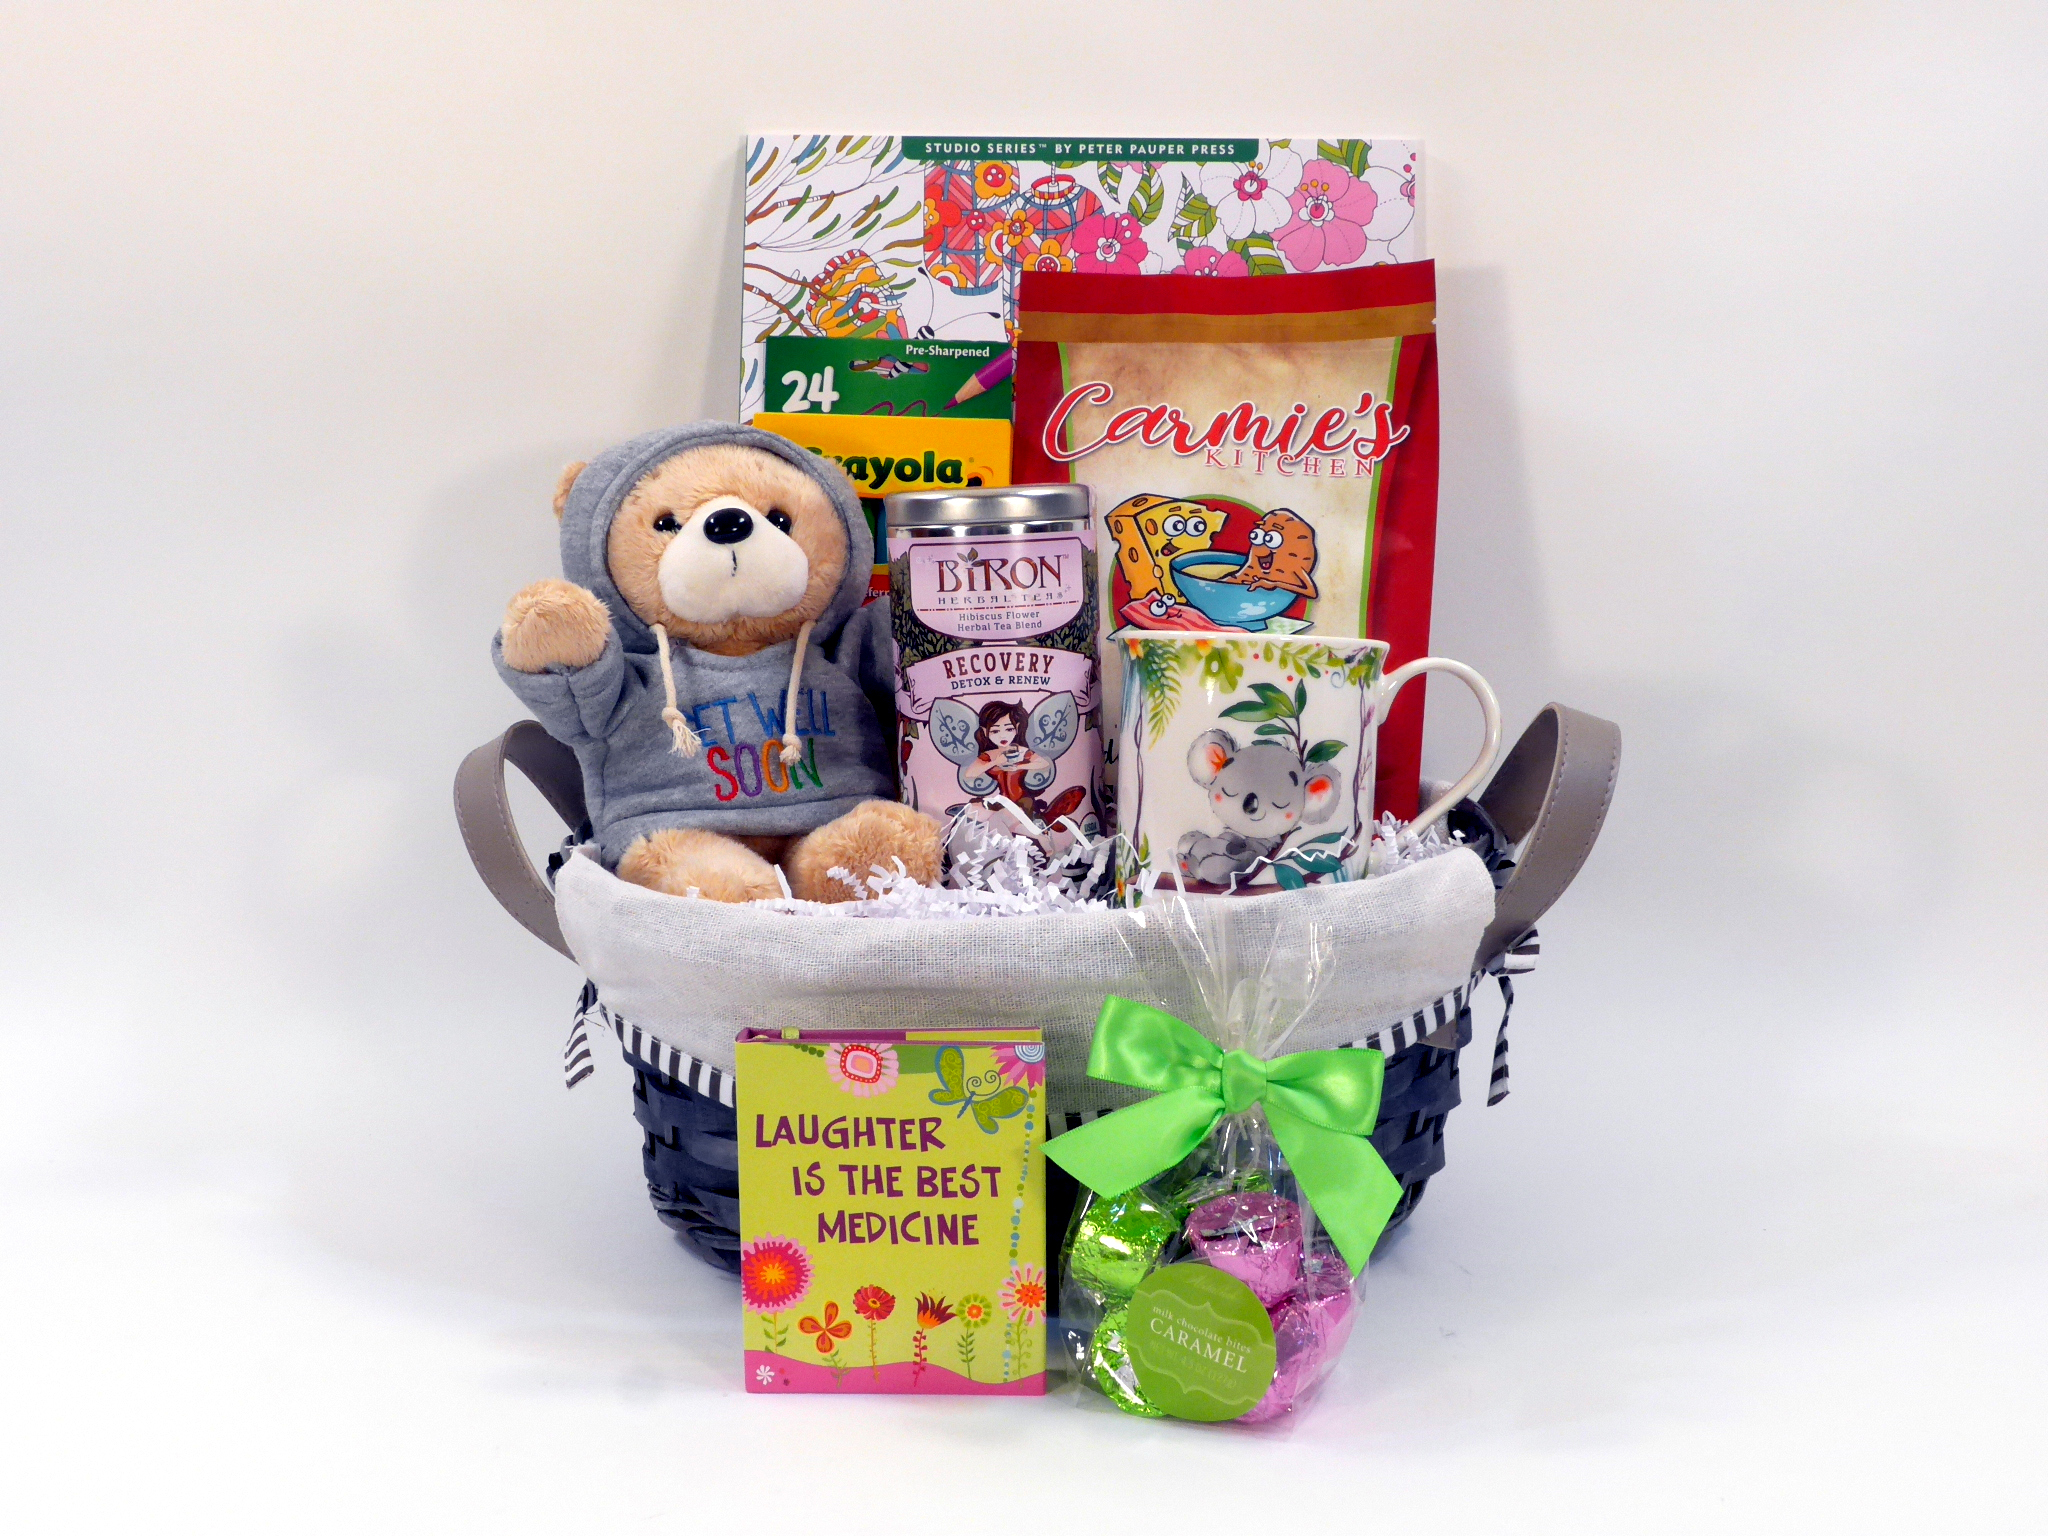 Rest & Recovery Get Well Activity well soon gifts for women - get well soon  gifts for men, One Basket - Food 4 Less